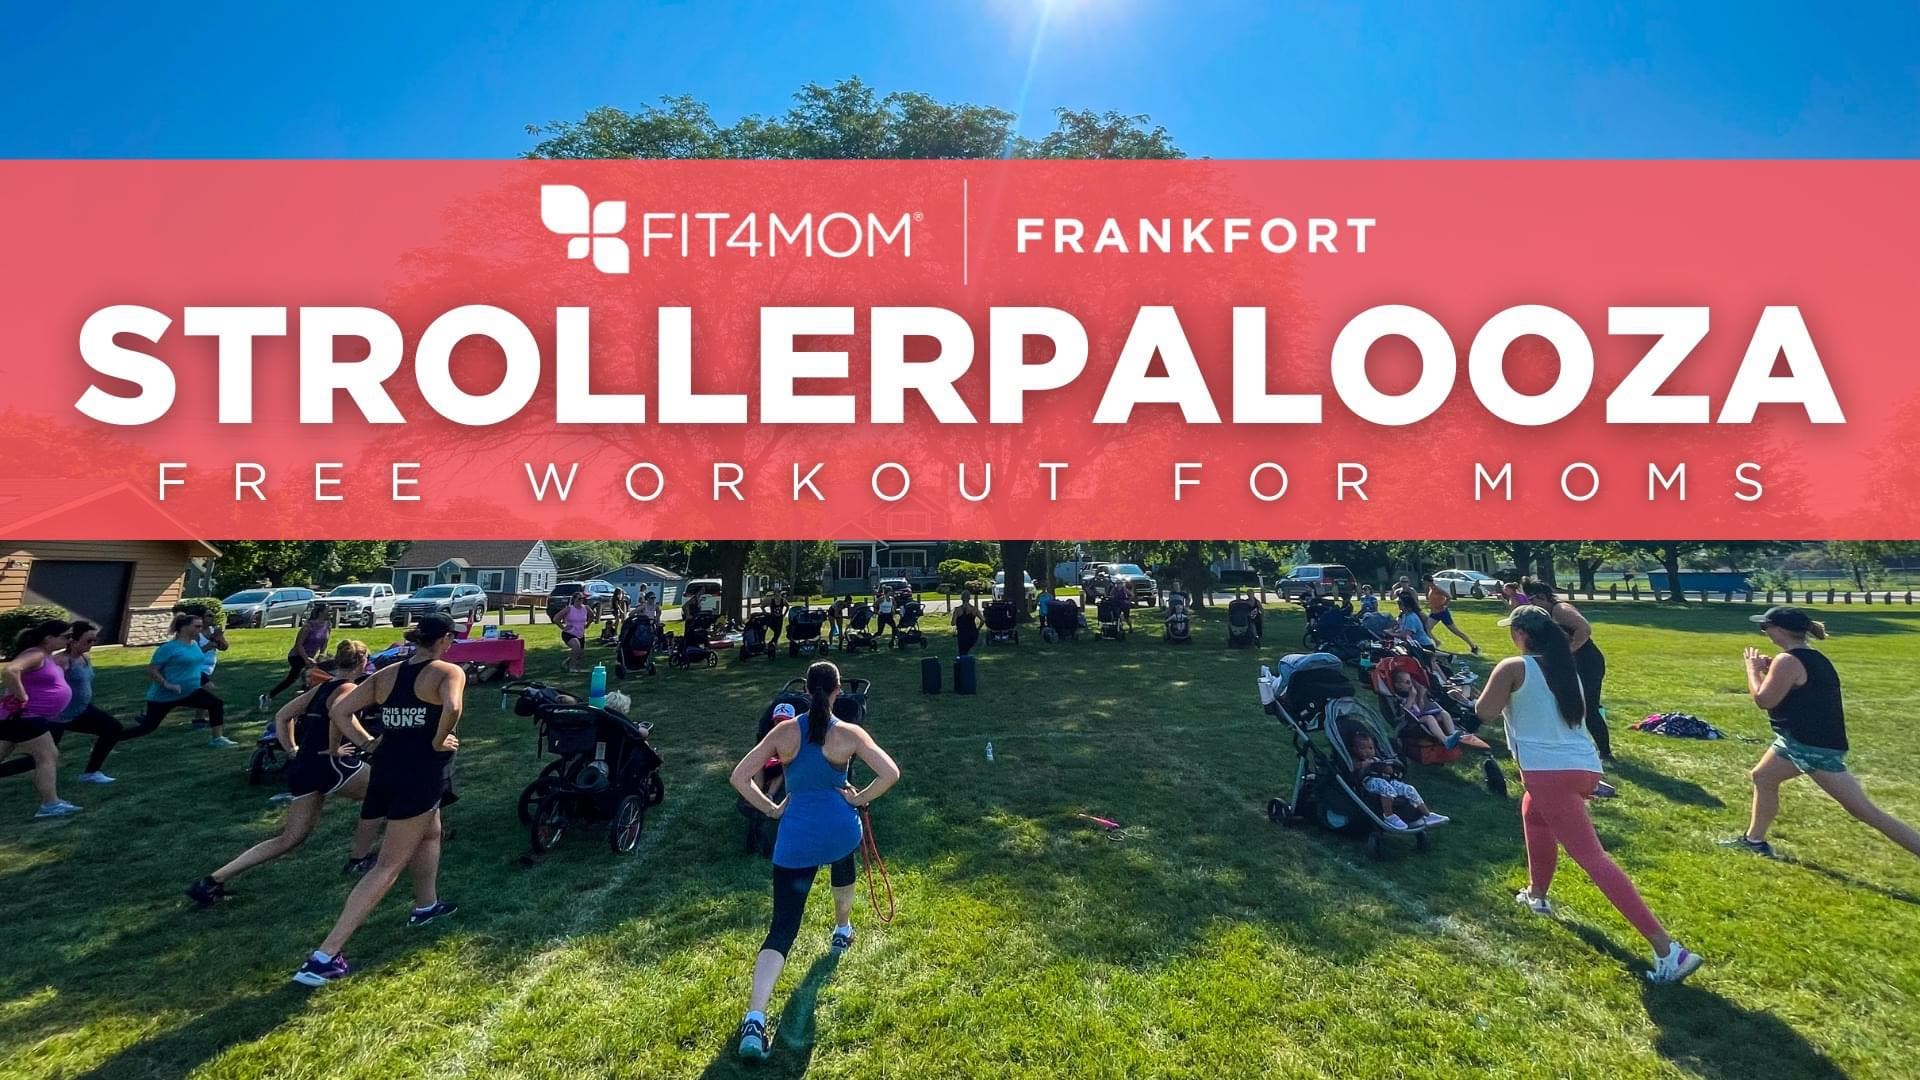 STROLLERPALOOZA: Free Workout for Moms!